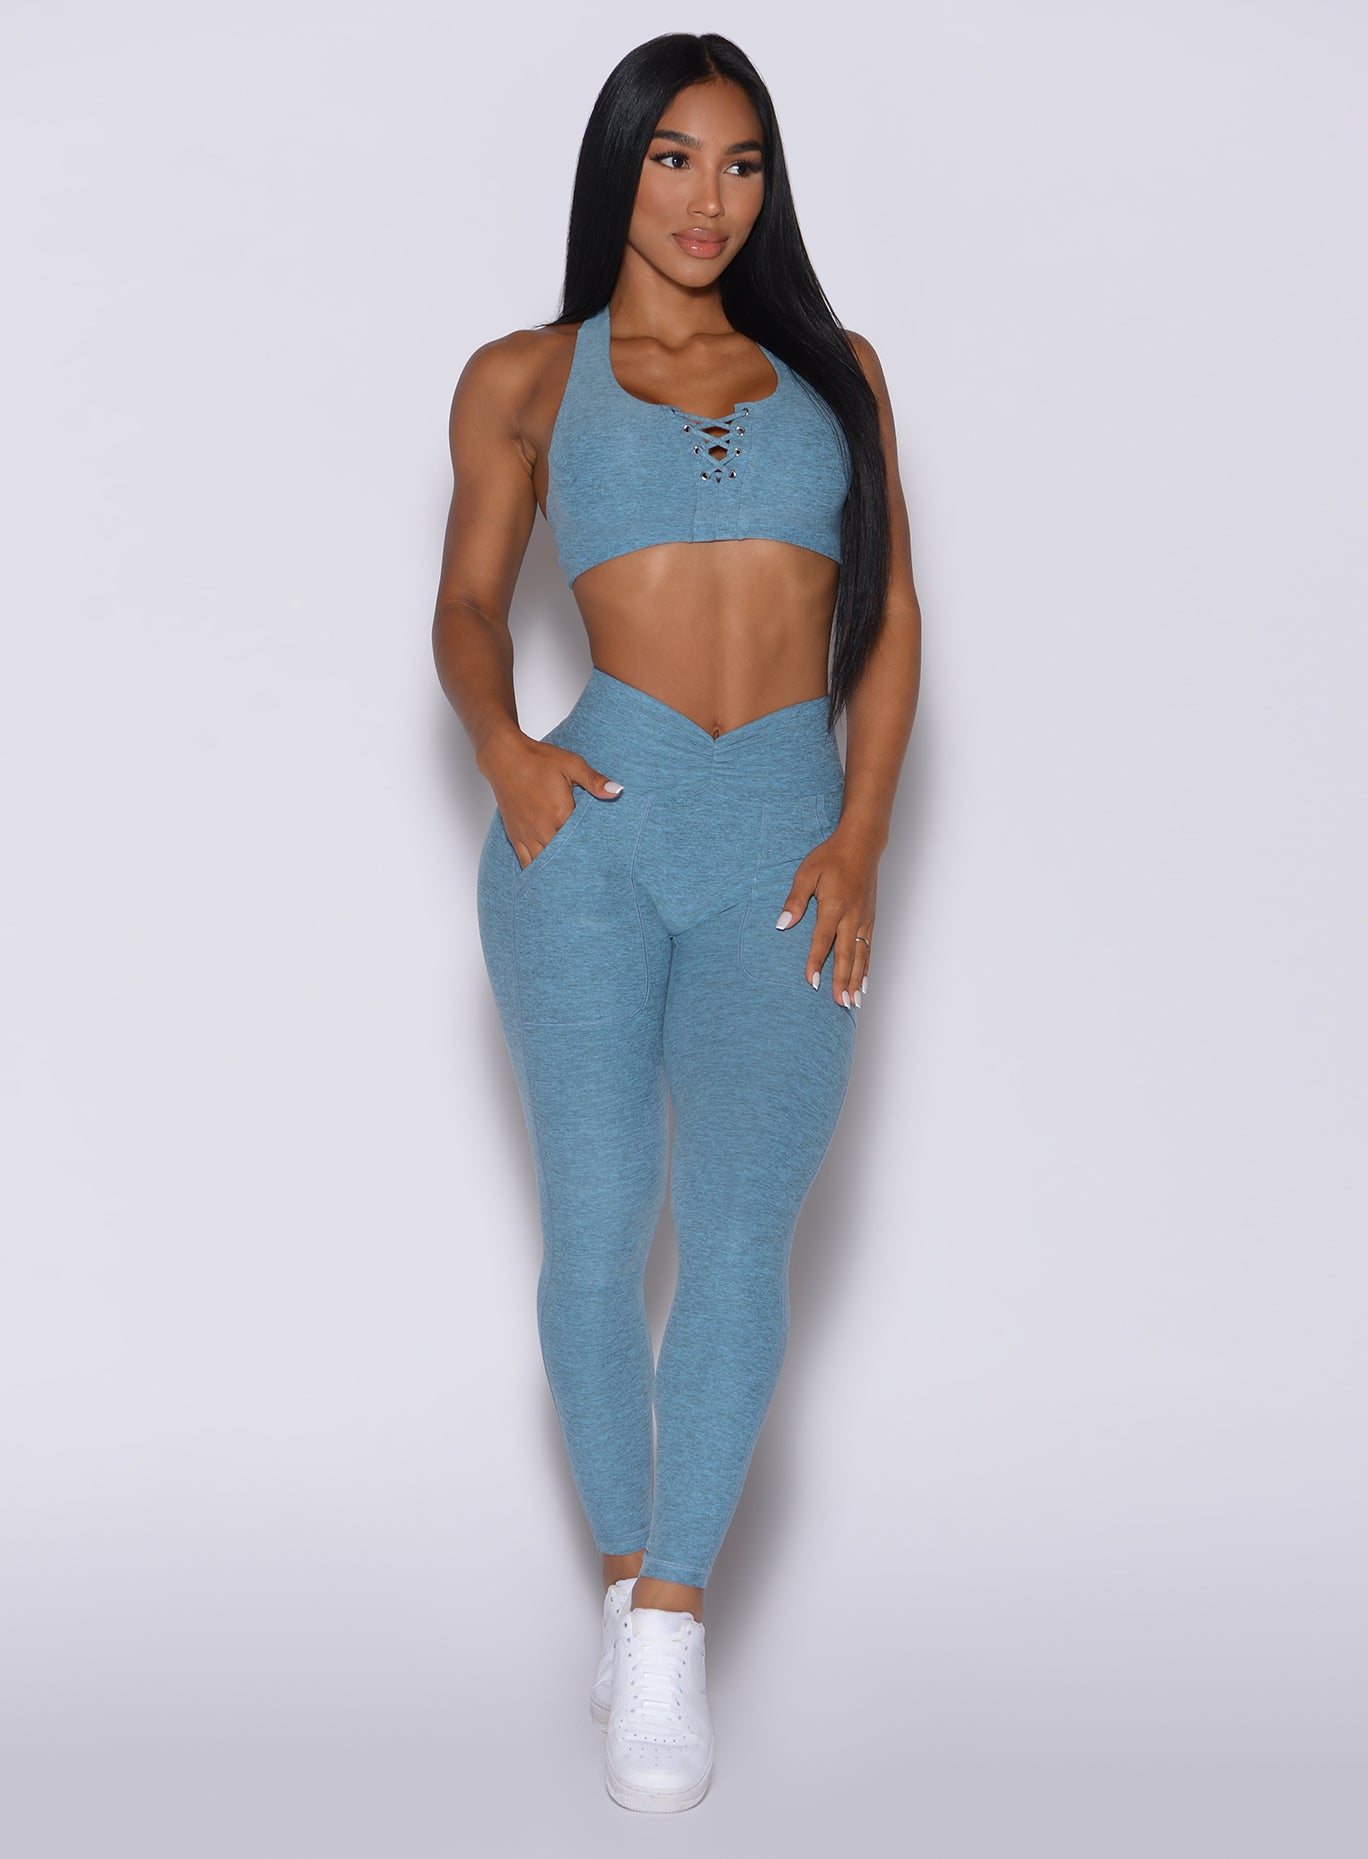 Front profile view of a model wearing our V scrunch leggings in baby blue color and a matching bra